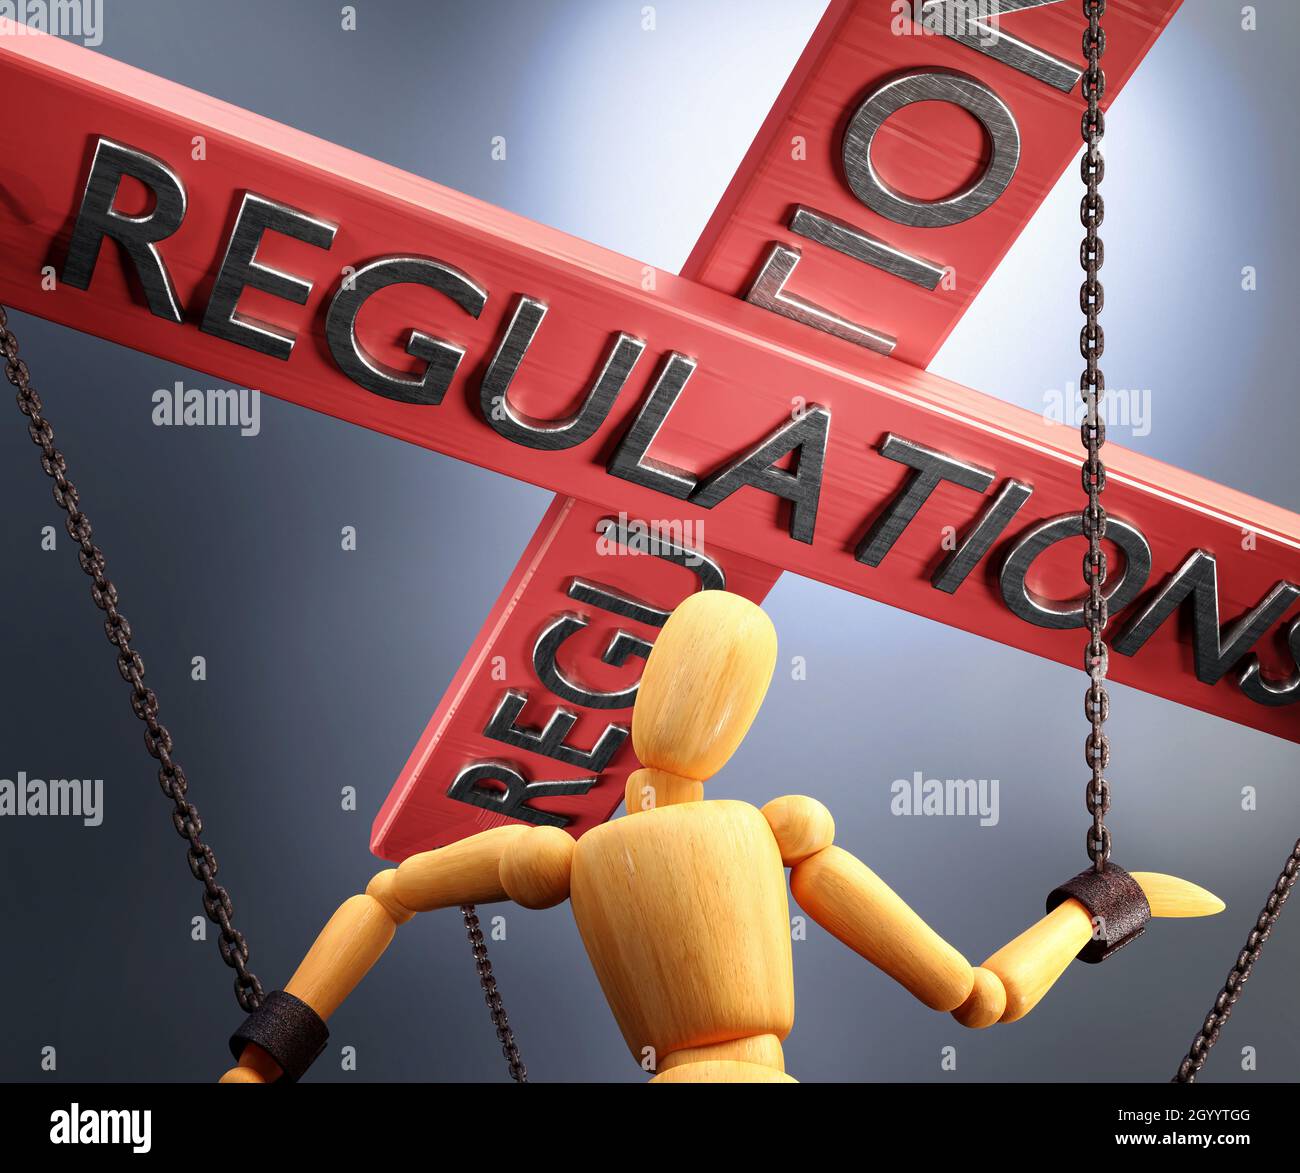 Regulations control, power, authority and manipulation symbolized by control bar with word Regulations pulling the strings (chains) of a wooden puppet Stock Photo